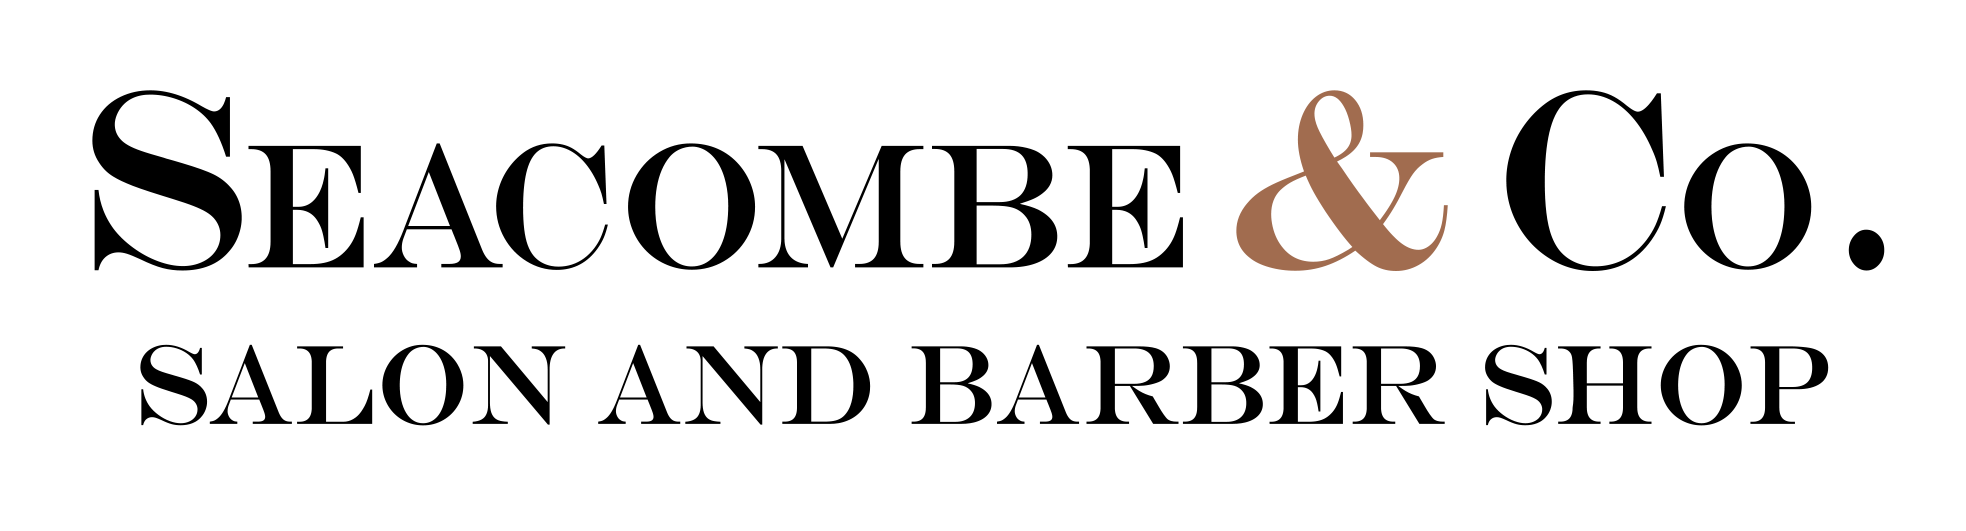 Seacombe&Co-logo-on-white.png